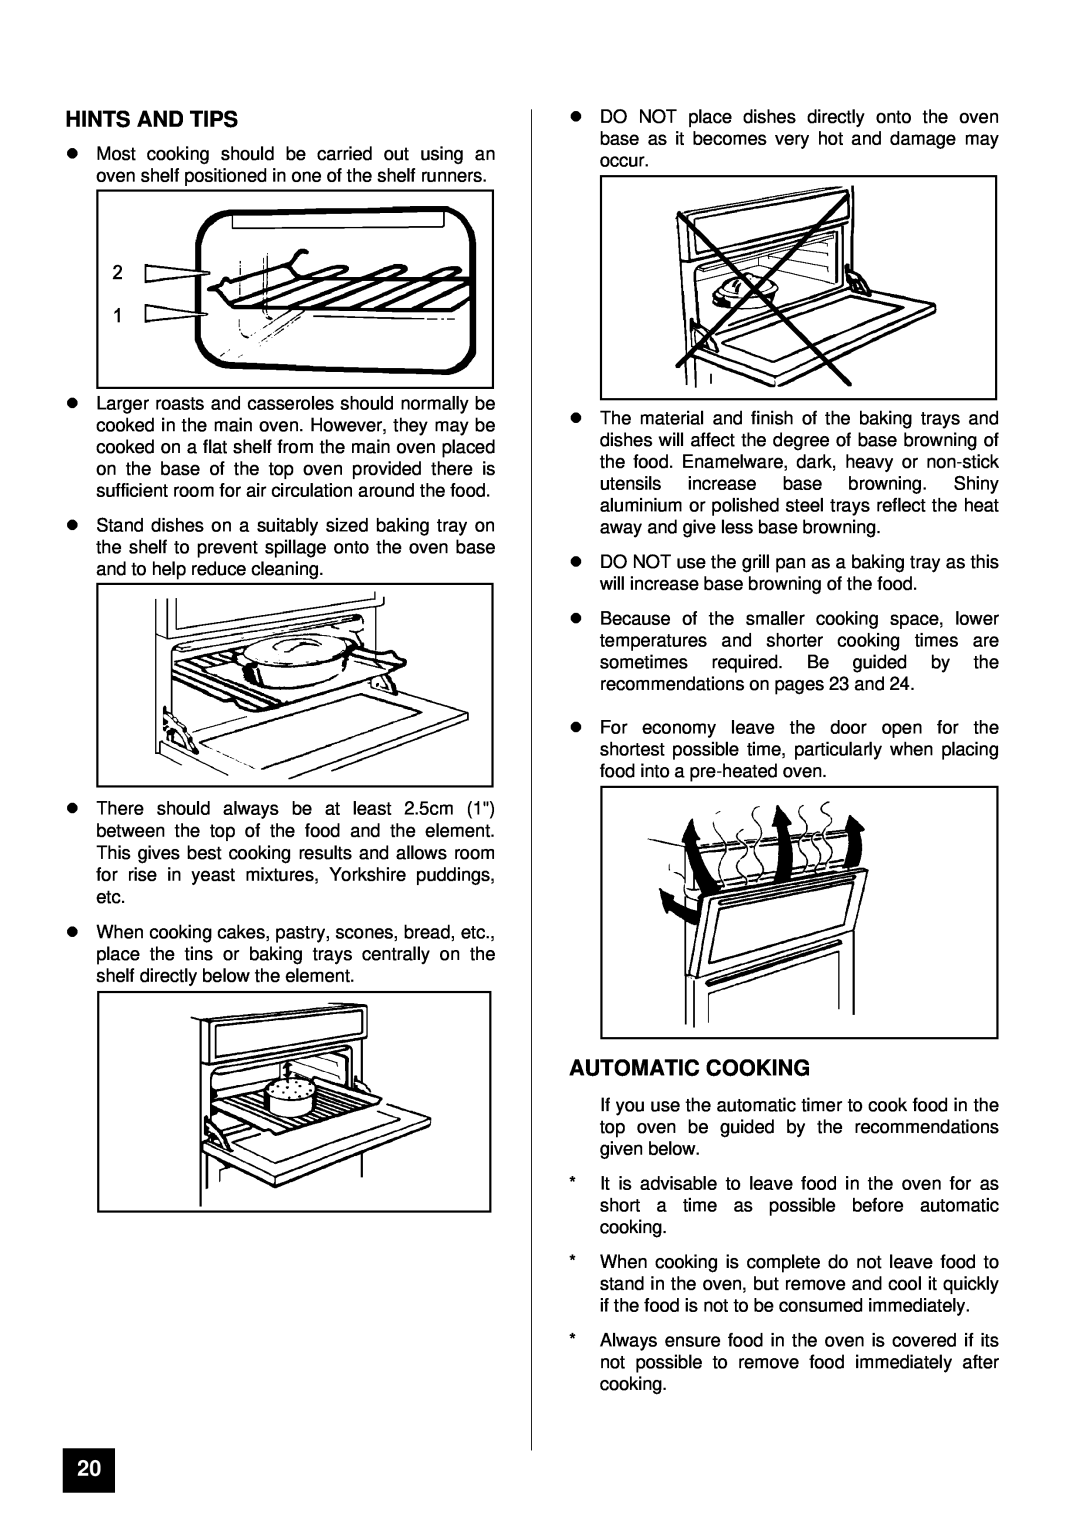 Tricity Bendix SI 452 installation instructions lHINTS AND TIPS, Automatic Cooking 